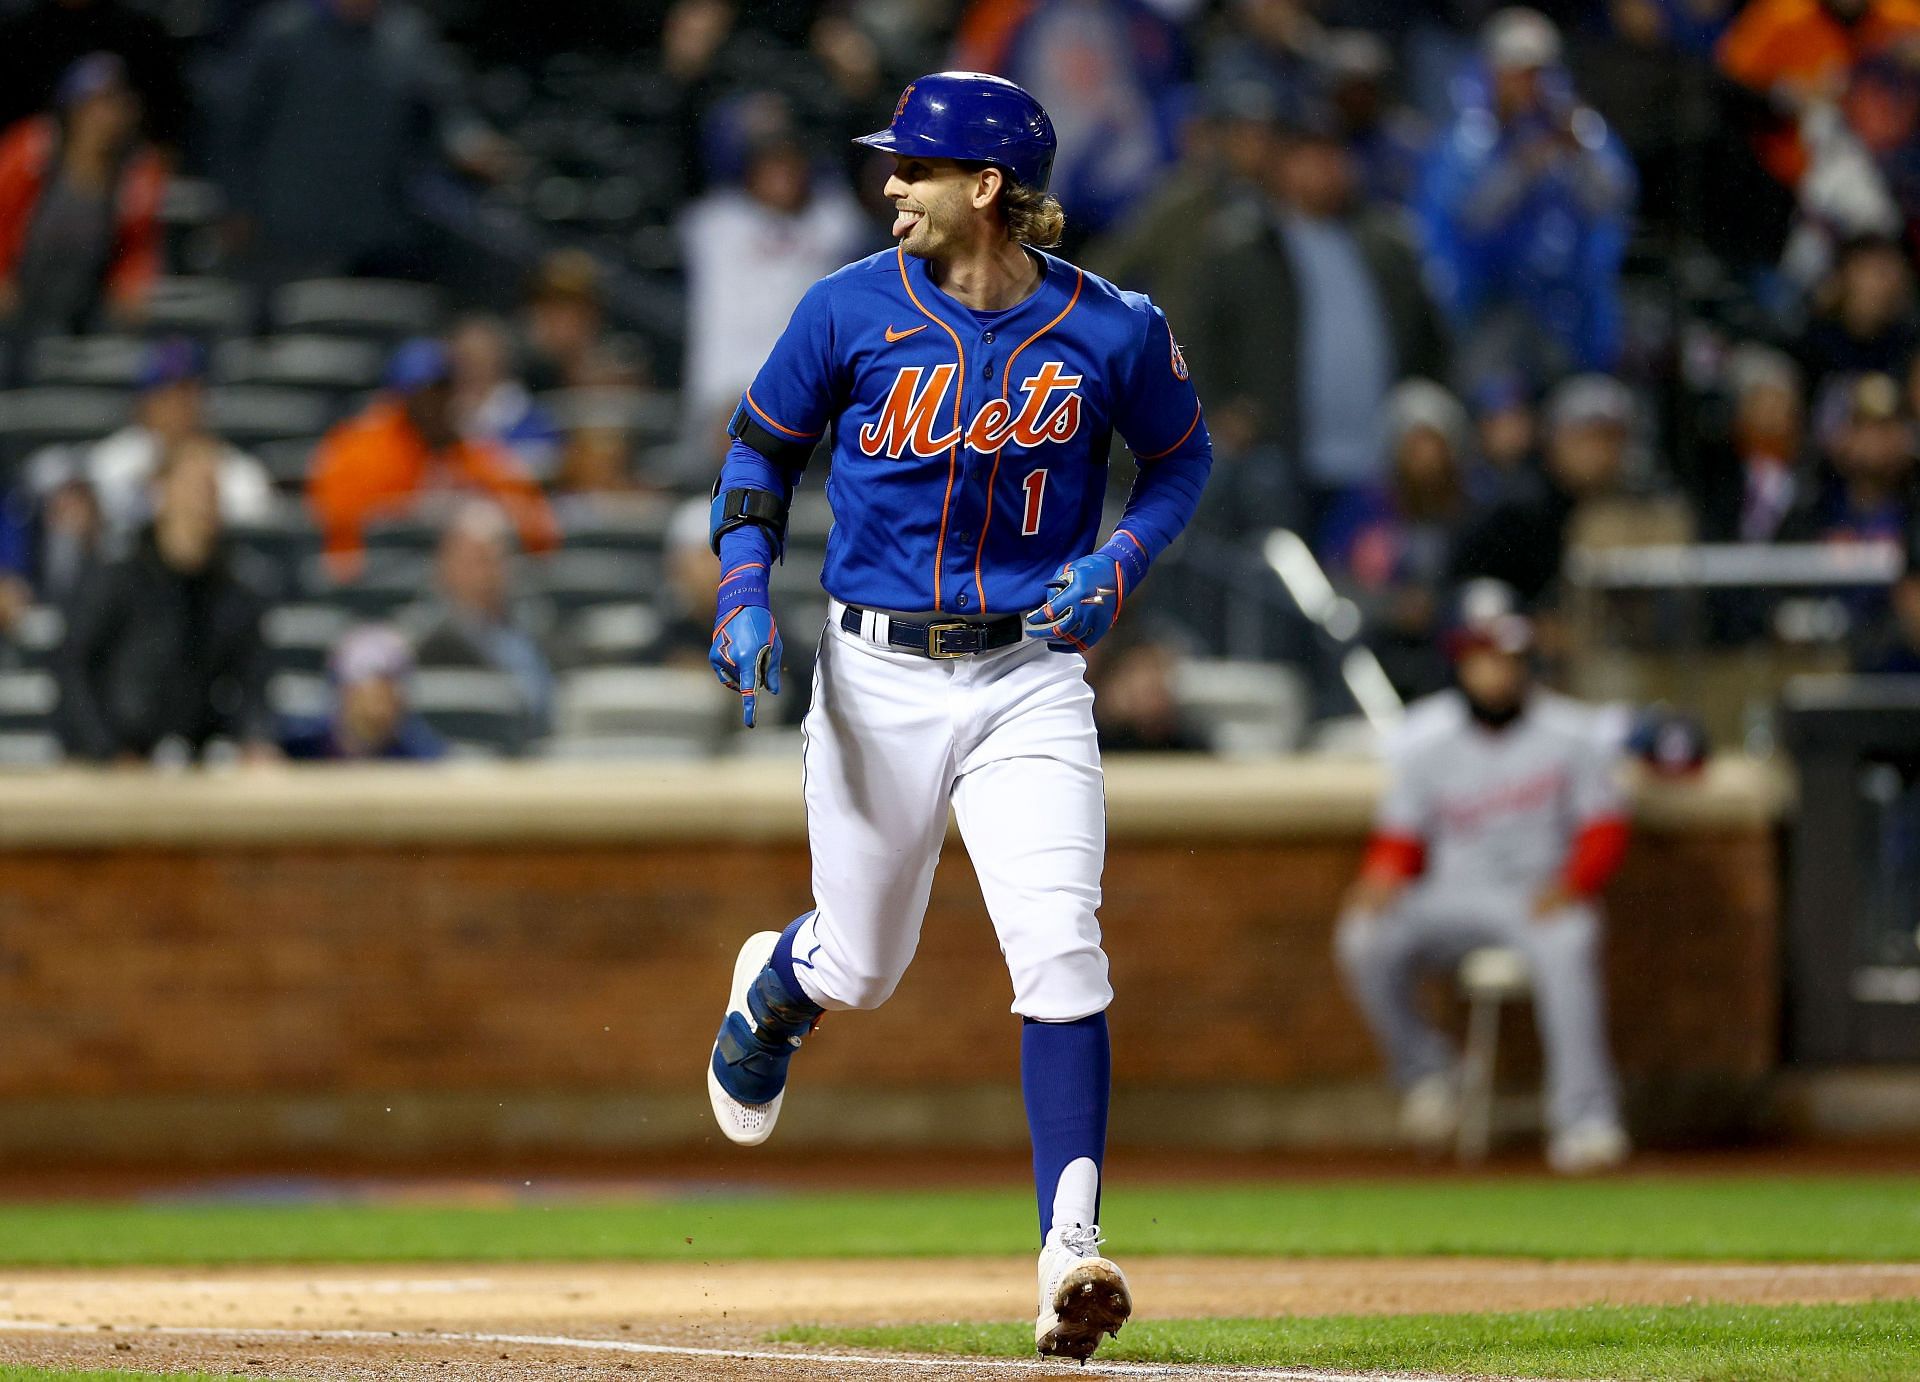 Jeff McNeil #1 of the New York Mets reacts after he hit a solo home run in the first inning against the Washington Nationals during game two of a double header at Citi Field on October 04, 2022 in the Flushing neighborhood of the Queens borough of New York City.